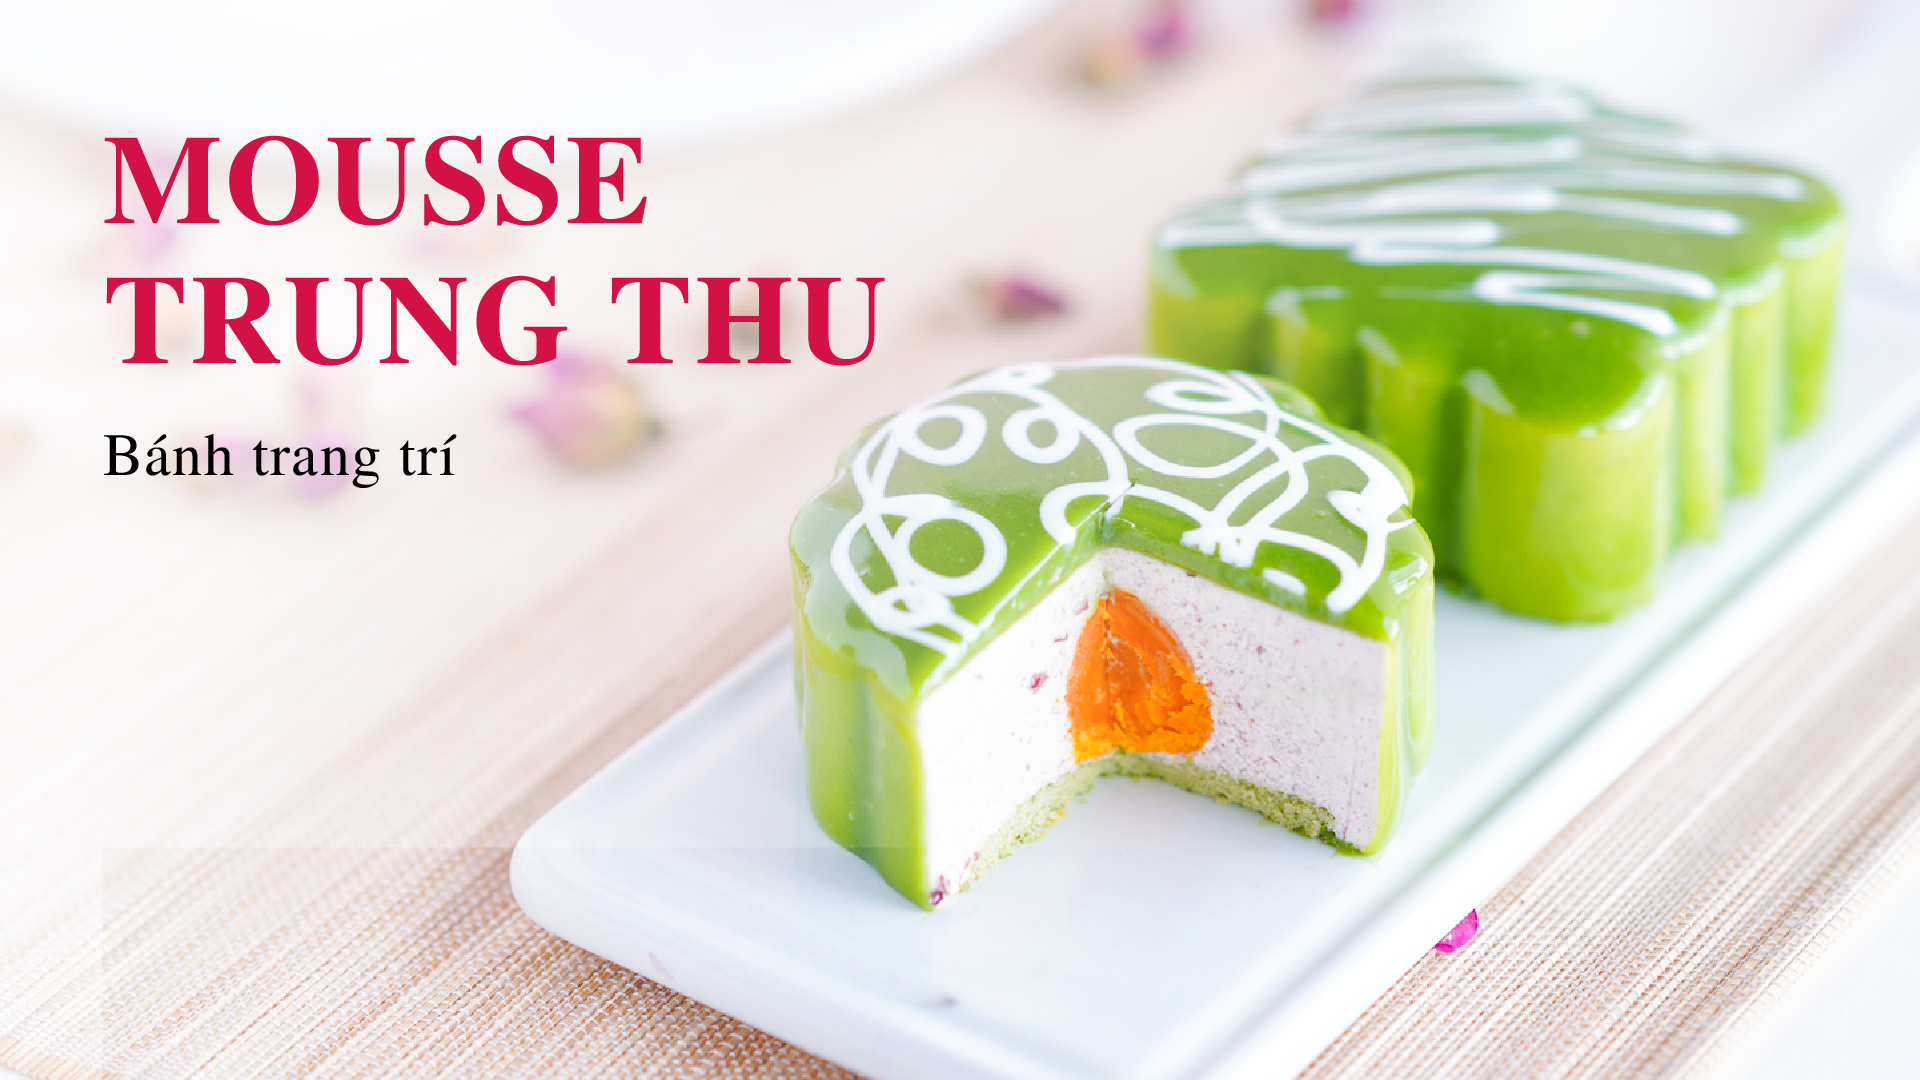 Mousse Trung Thu